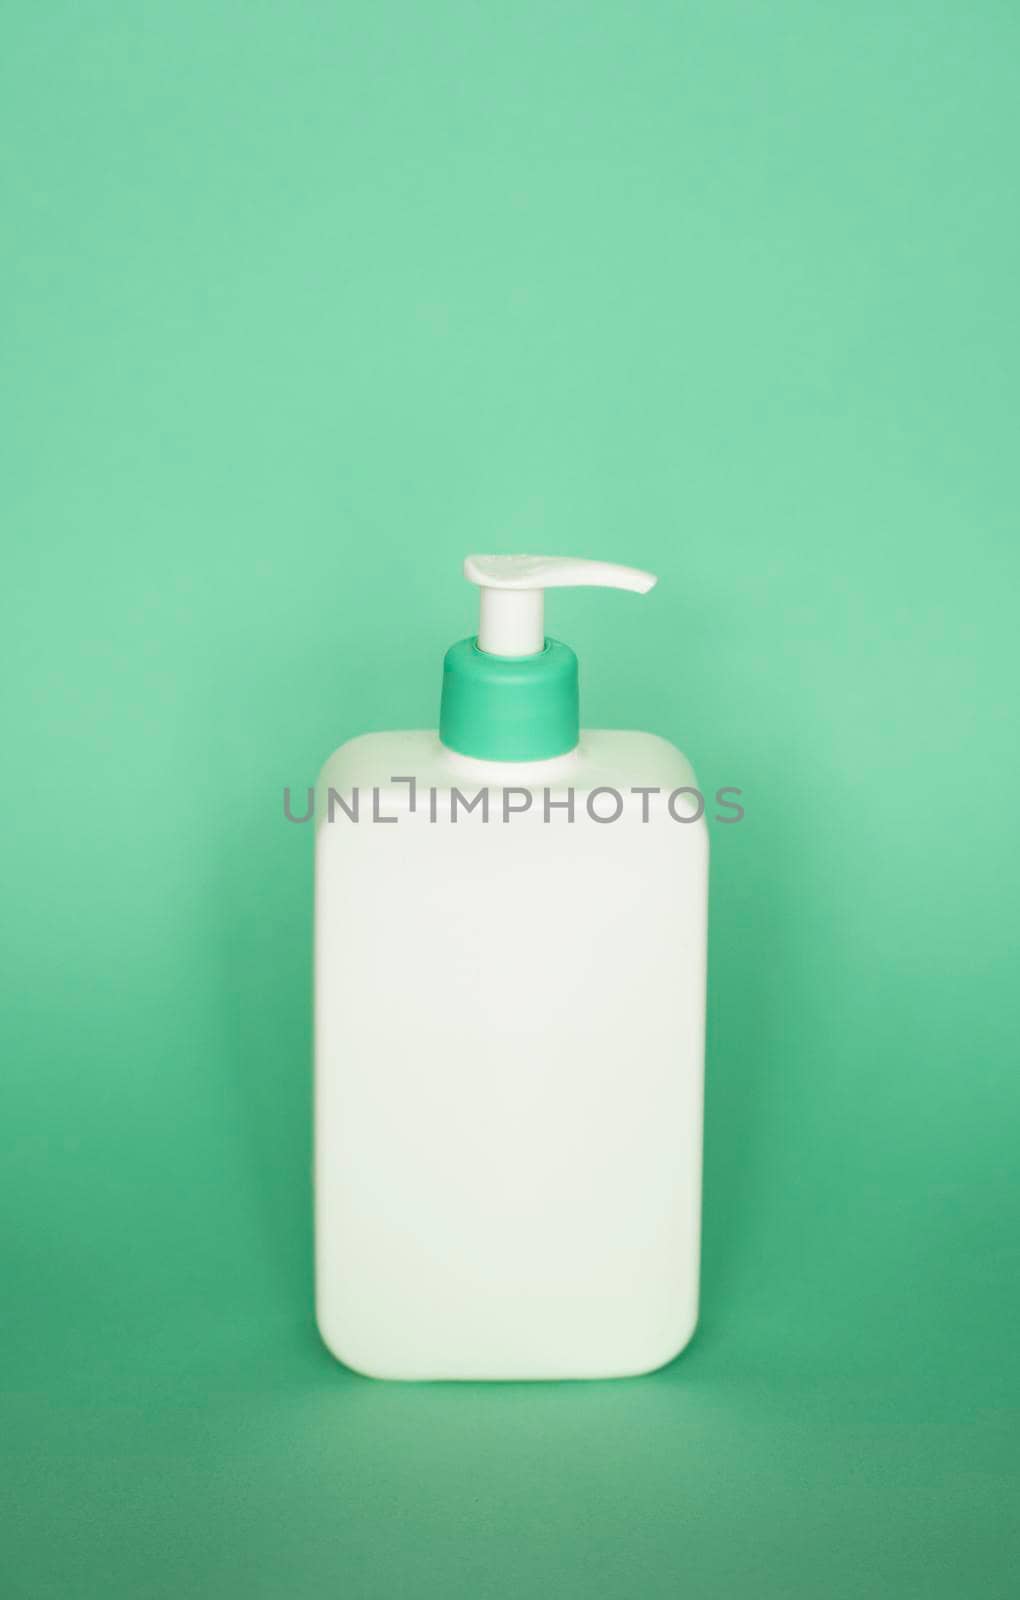 White plastic soap dispenser pump bottle isolated on green background. Skin care lotion. Bathing essential product. Shampoo bottle. Bath and body lotion. Fine liquid hand wash. Bathroom accessories. by vovsht